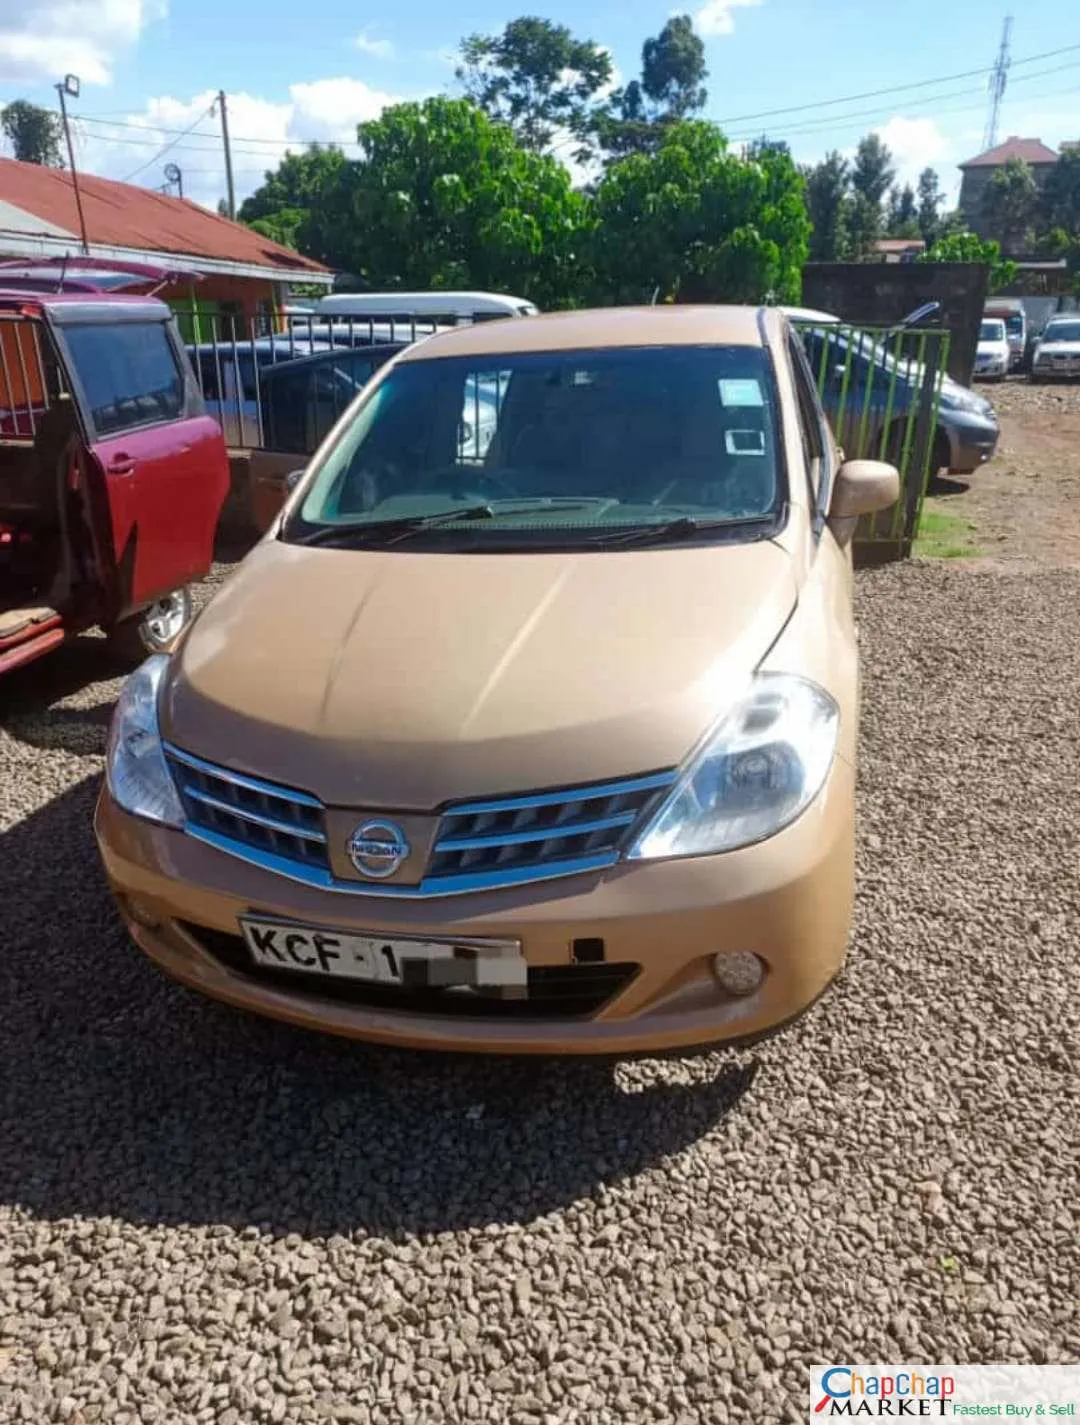 Nissan Tiida 330K QUICK SALE You ONLY Pay 20% Deposit Trade in Ok Wow!